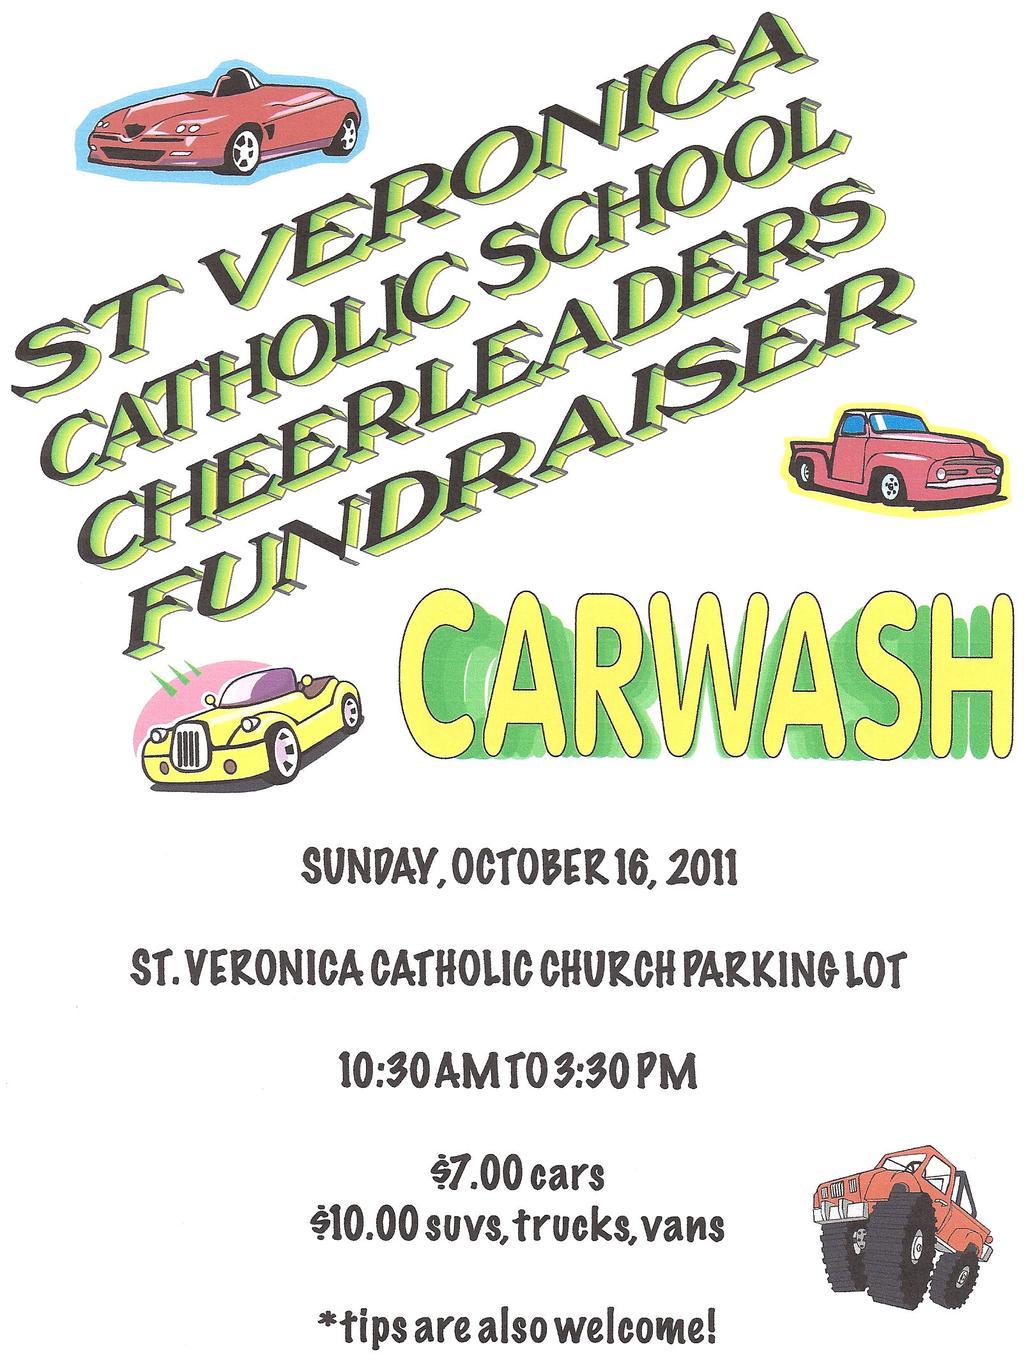 Support our Cheerleaders Can Drive! Bring your aluminum cans on Saturday, October 15th 3-6 p.m. and Sunday, October 16th 10:30 a.